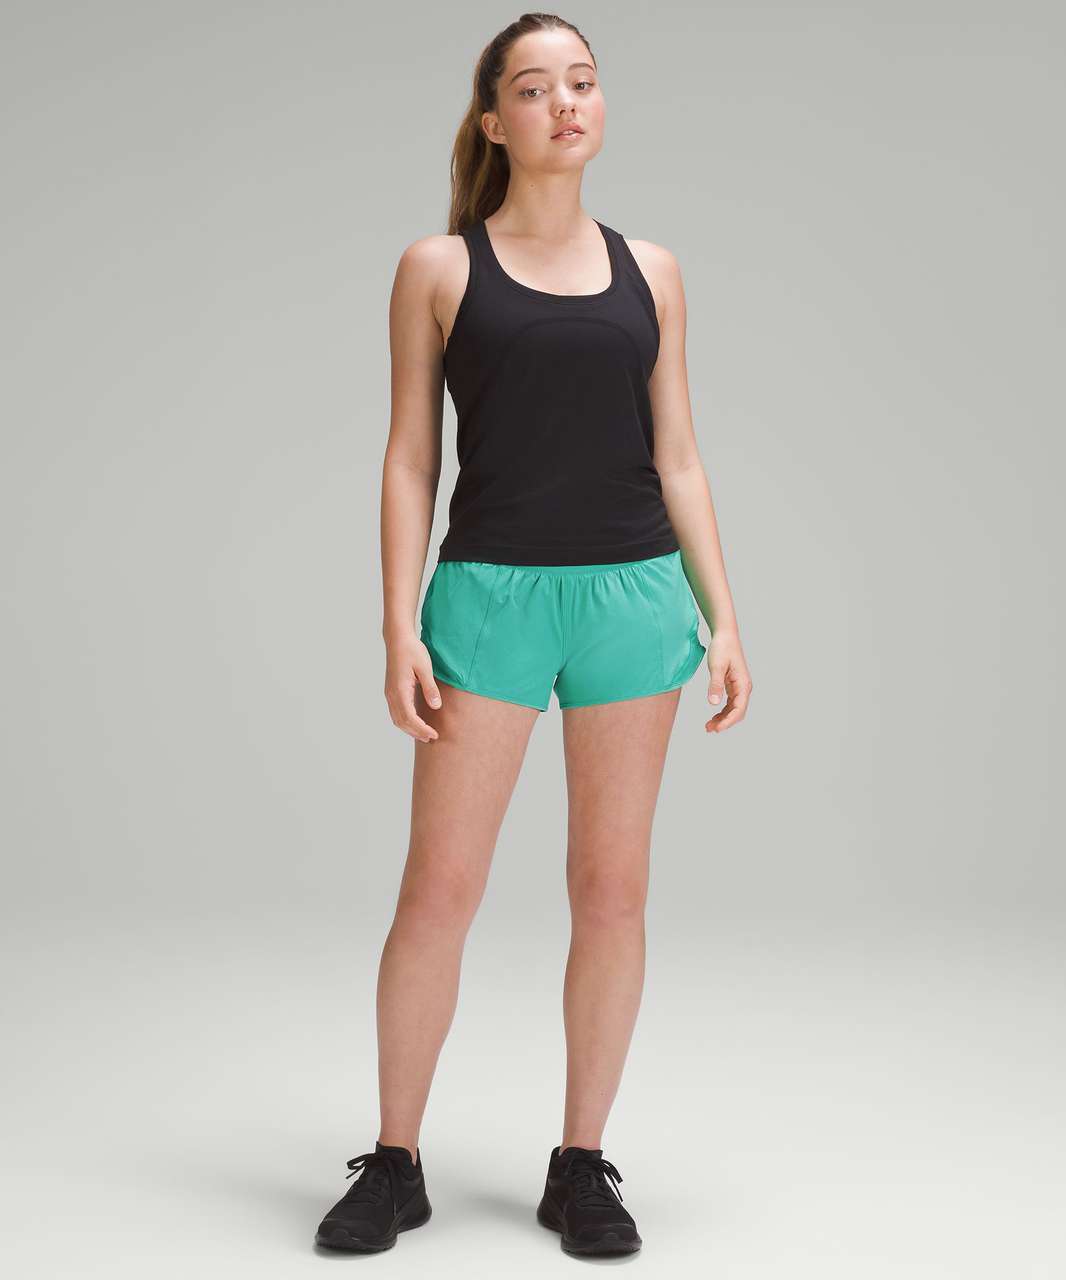 Lululemon Hotty Hot Low-Rise Lined Short 2.5" - Kelly Green